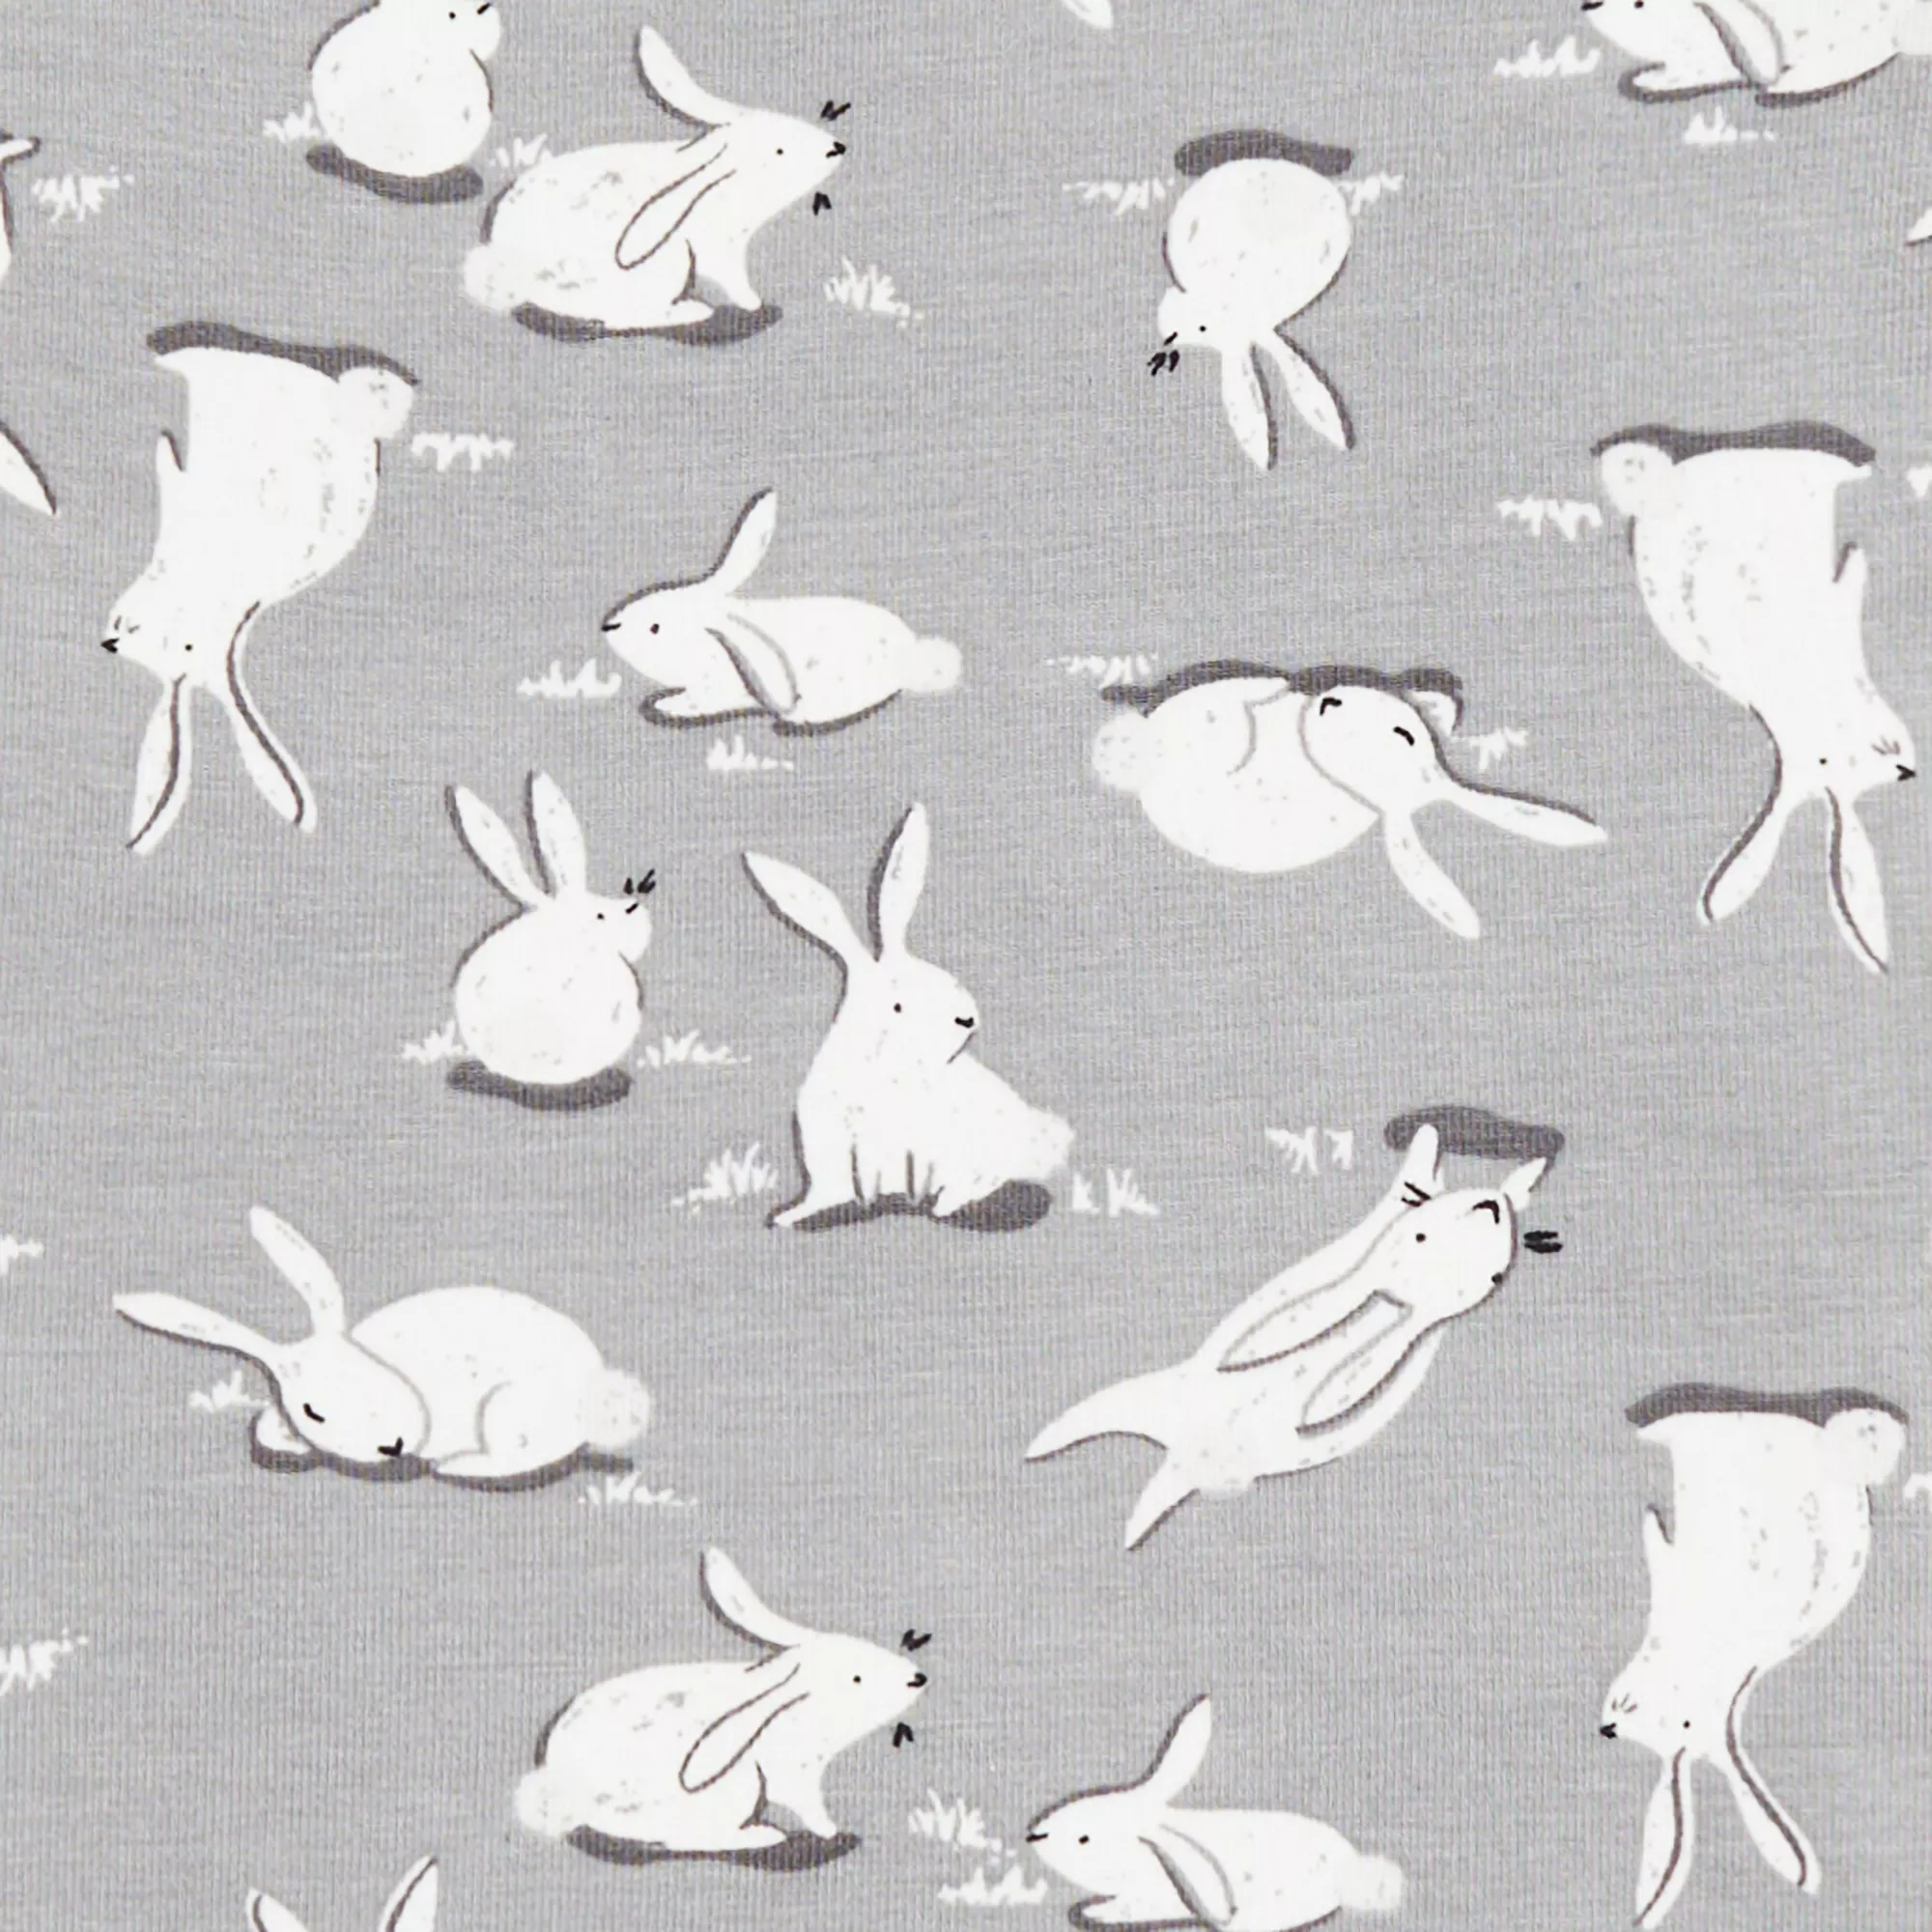 Footless Romper Cottontail Grey